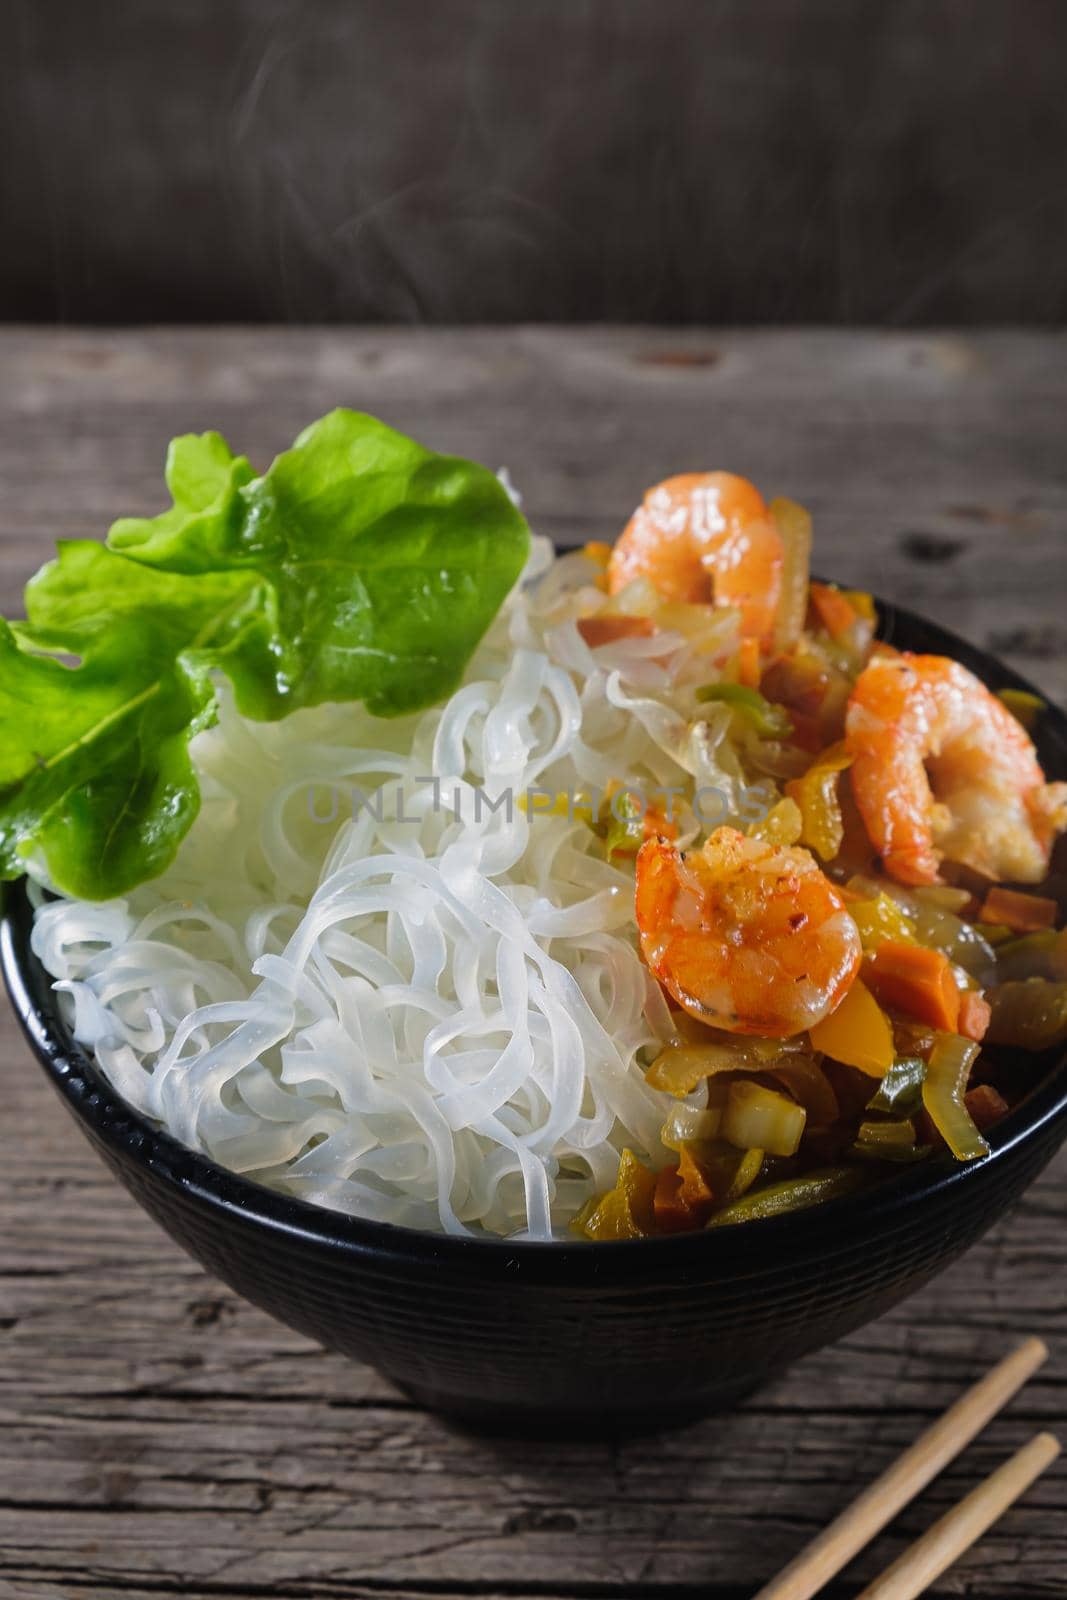 A plate of rice noodles stands on an old wooden table top. Rice noodles are most common in the cuisines of East, Southeast Asia and South Asia. The side dish consists of fried onions, carrots, paprika, shrimp. Copy space. Vertical orientation